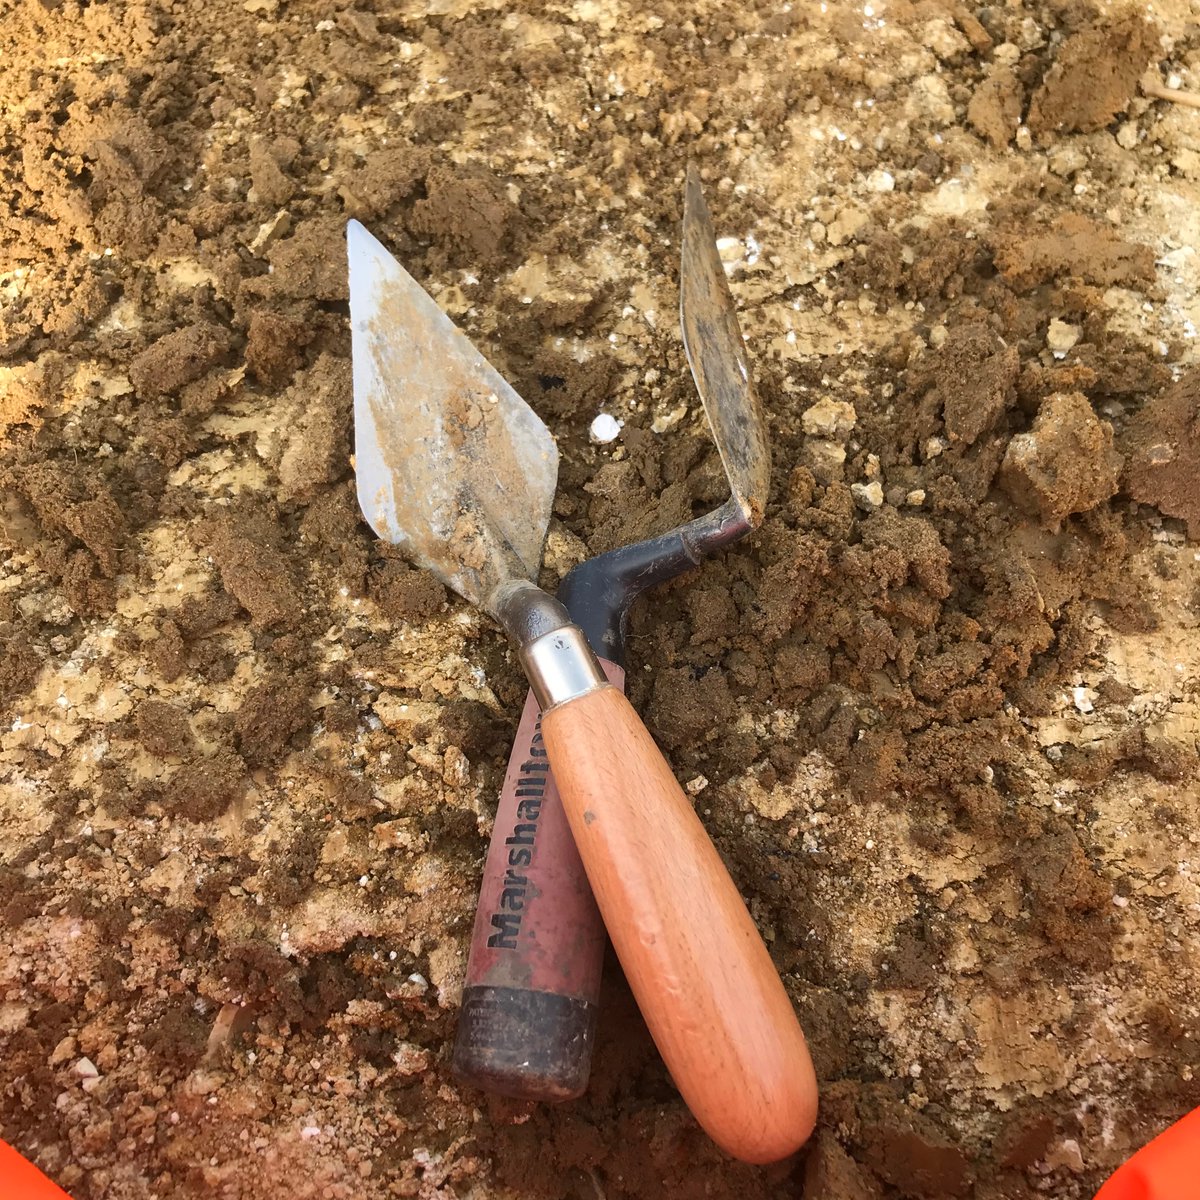 This month we are taking part in @explorearchives theme which is secrets! 

Excavation can be an exciting way to explore secrets and uncover new evidence within lithics.

What’s the best stone artefact you have found whilst excavating? Add them below! 

#Fieldwork #EYASecrets